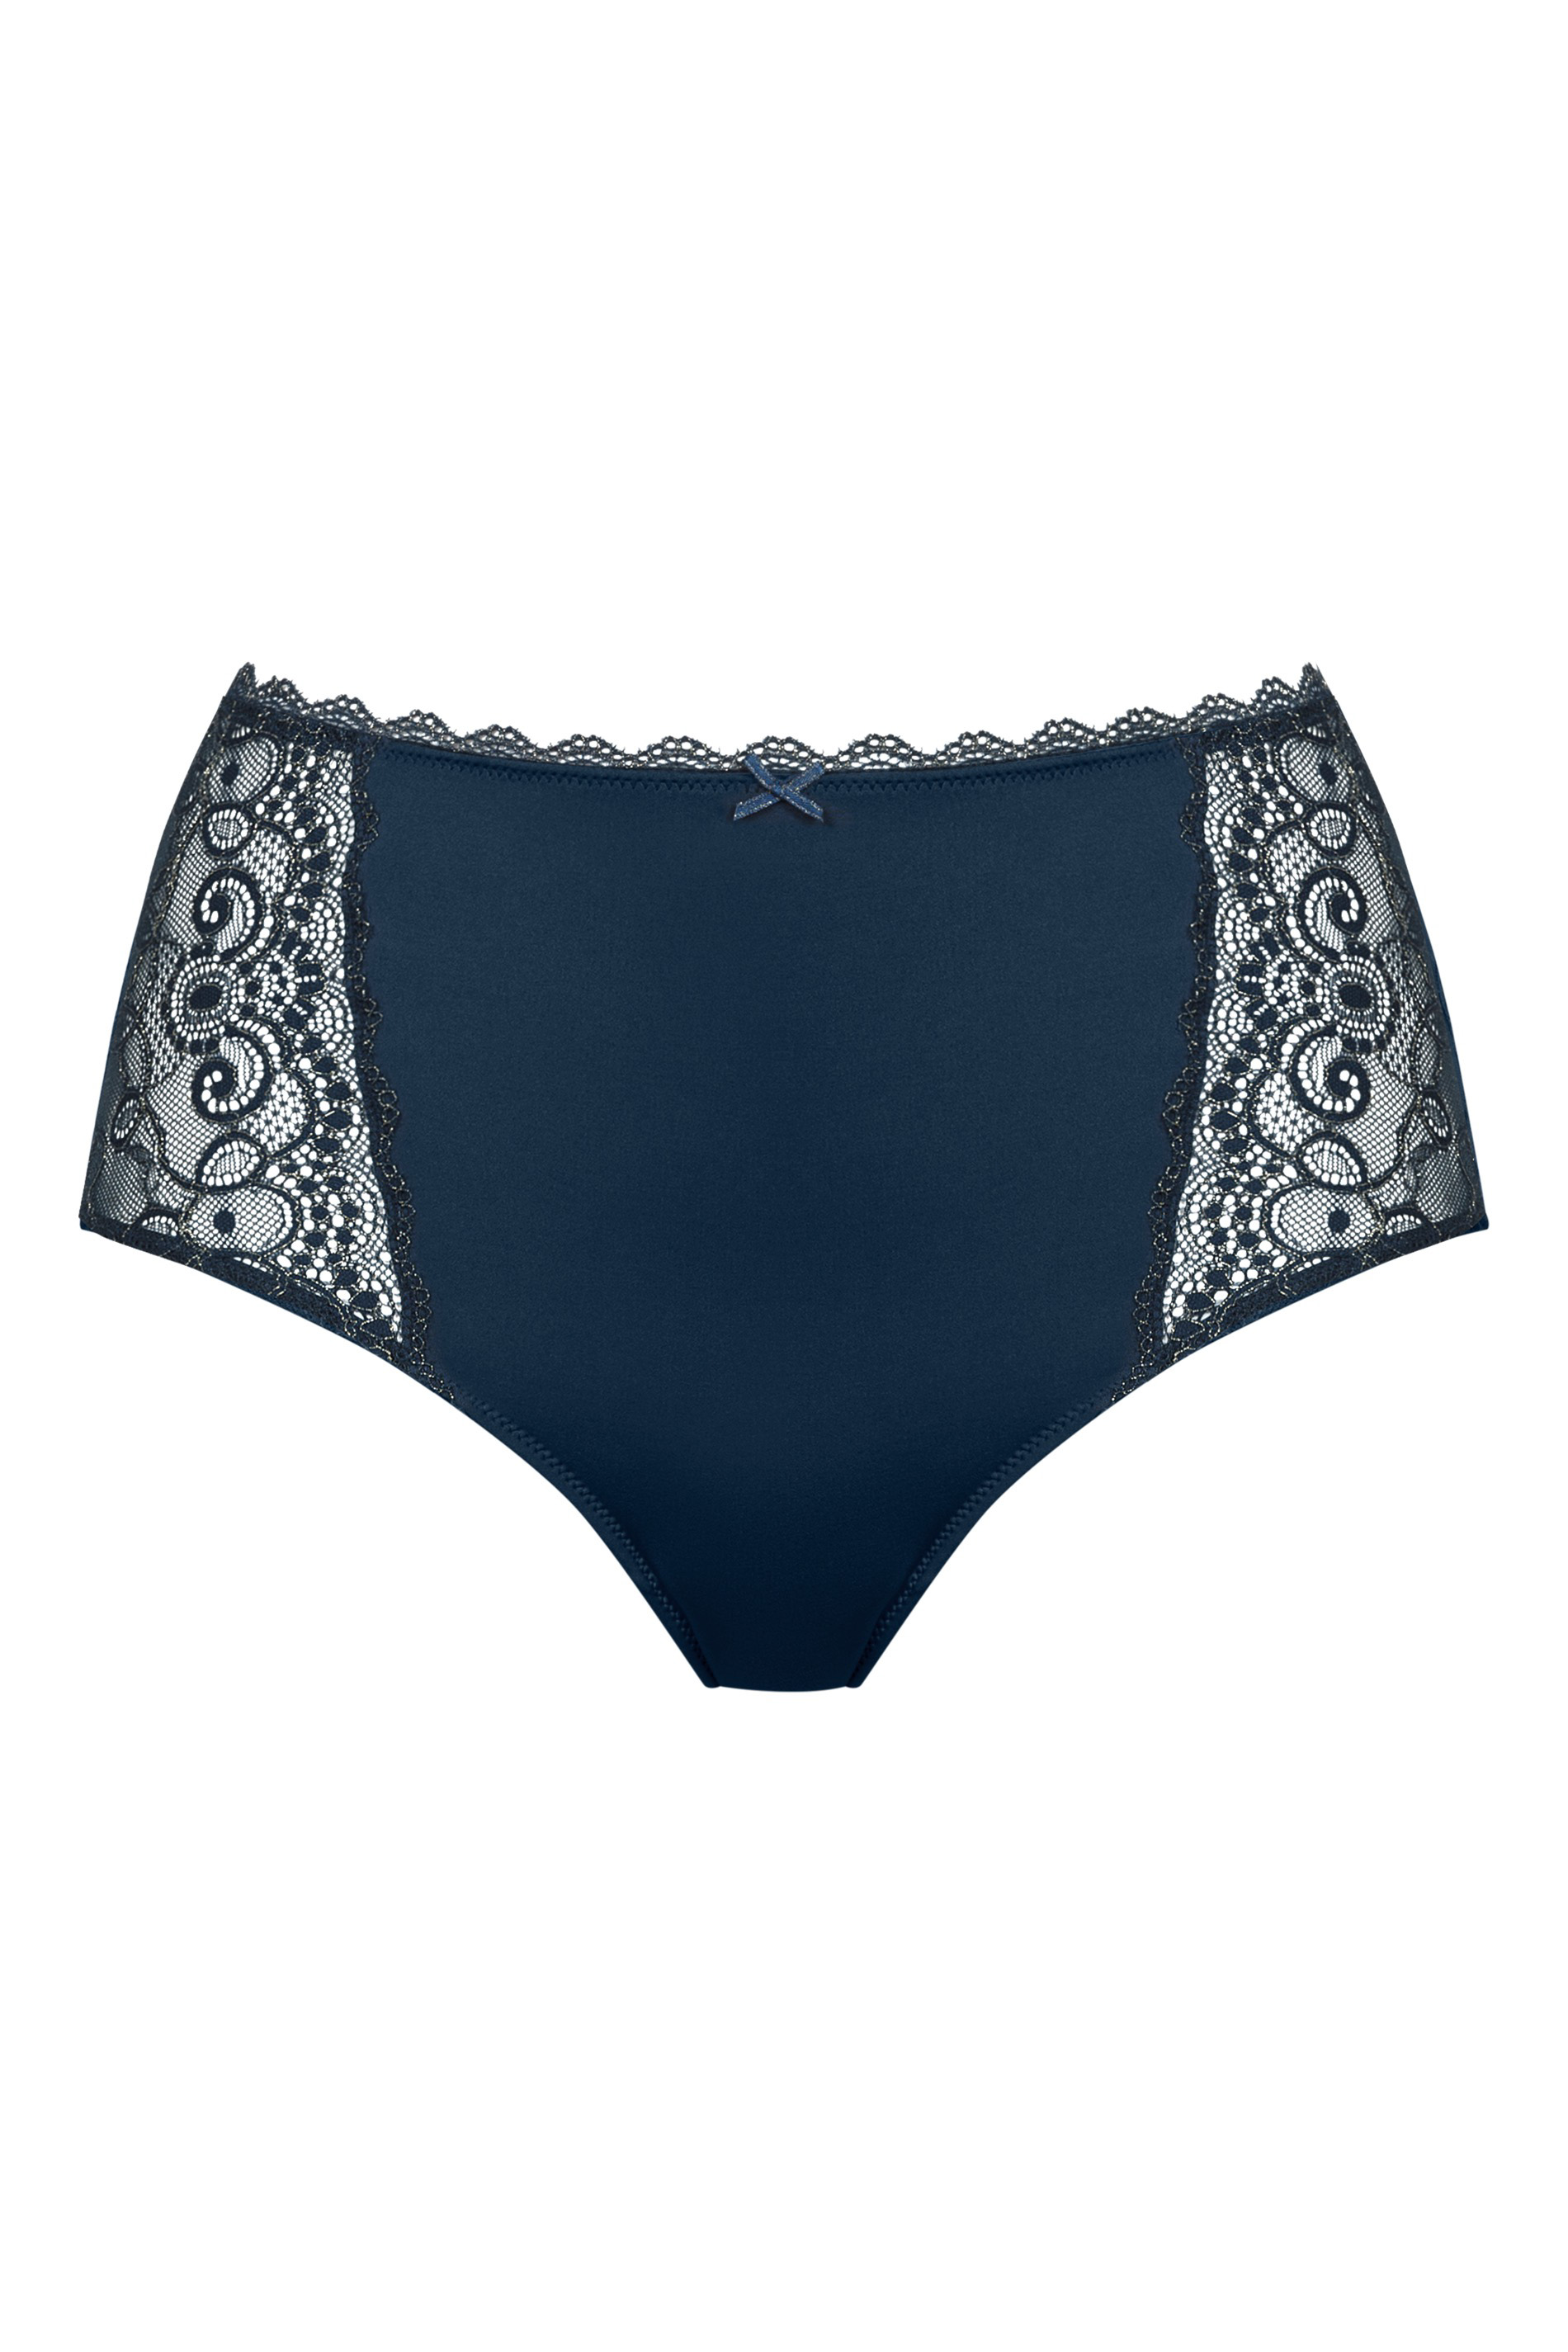 Tailleslip Serie Amorous Deluxe Uitknippen | mey®